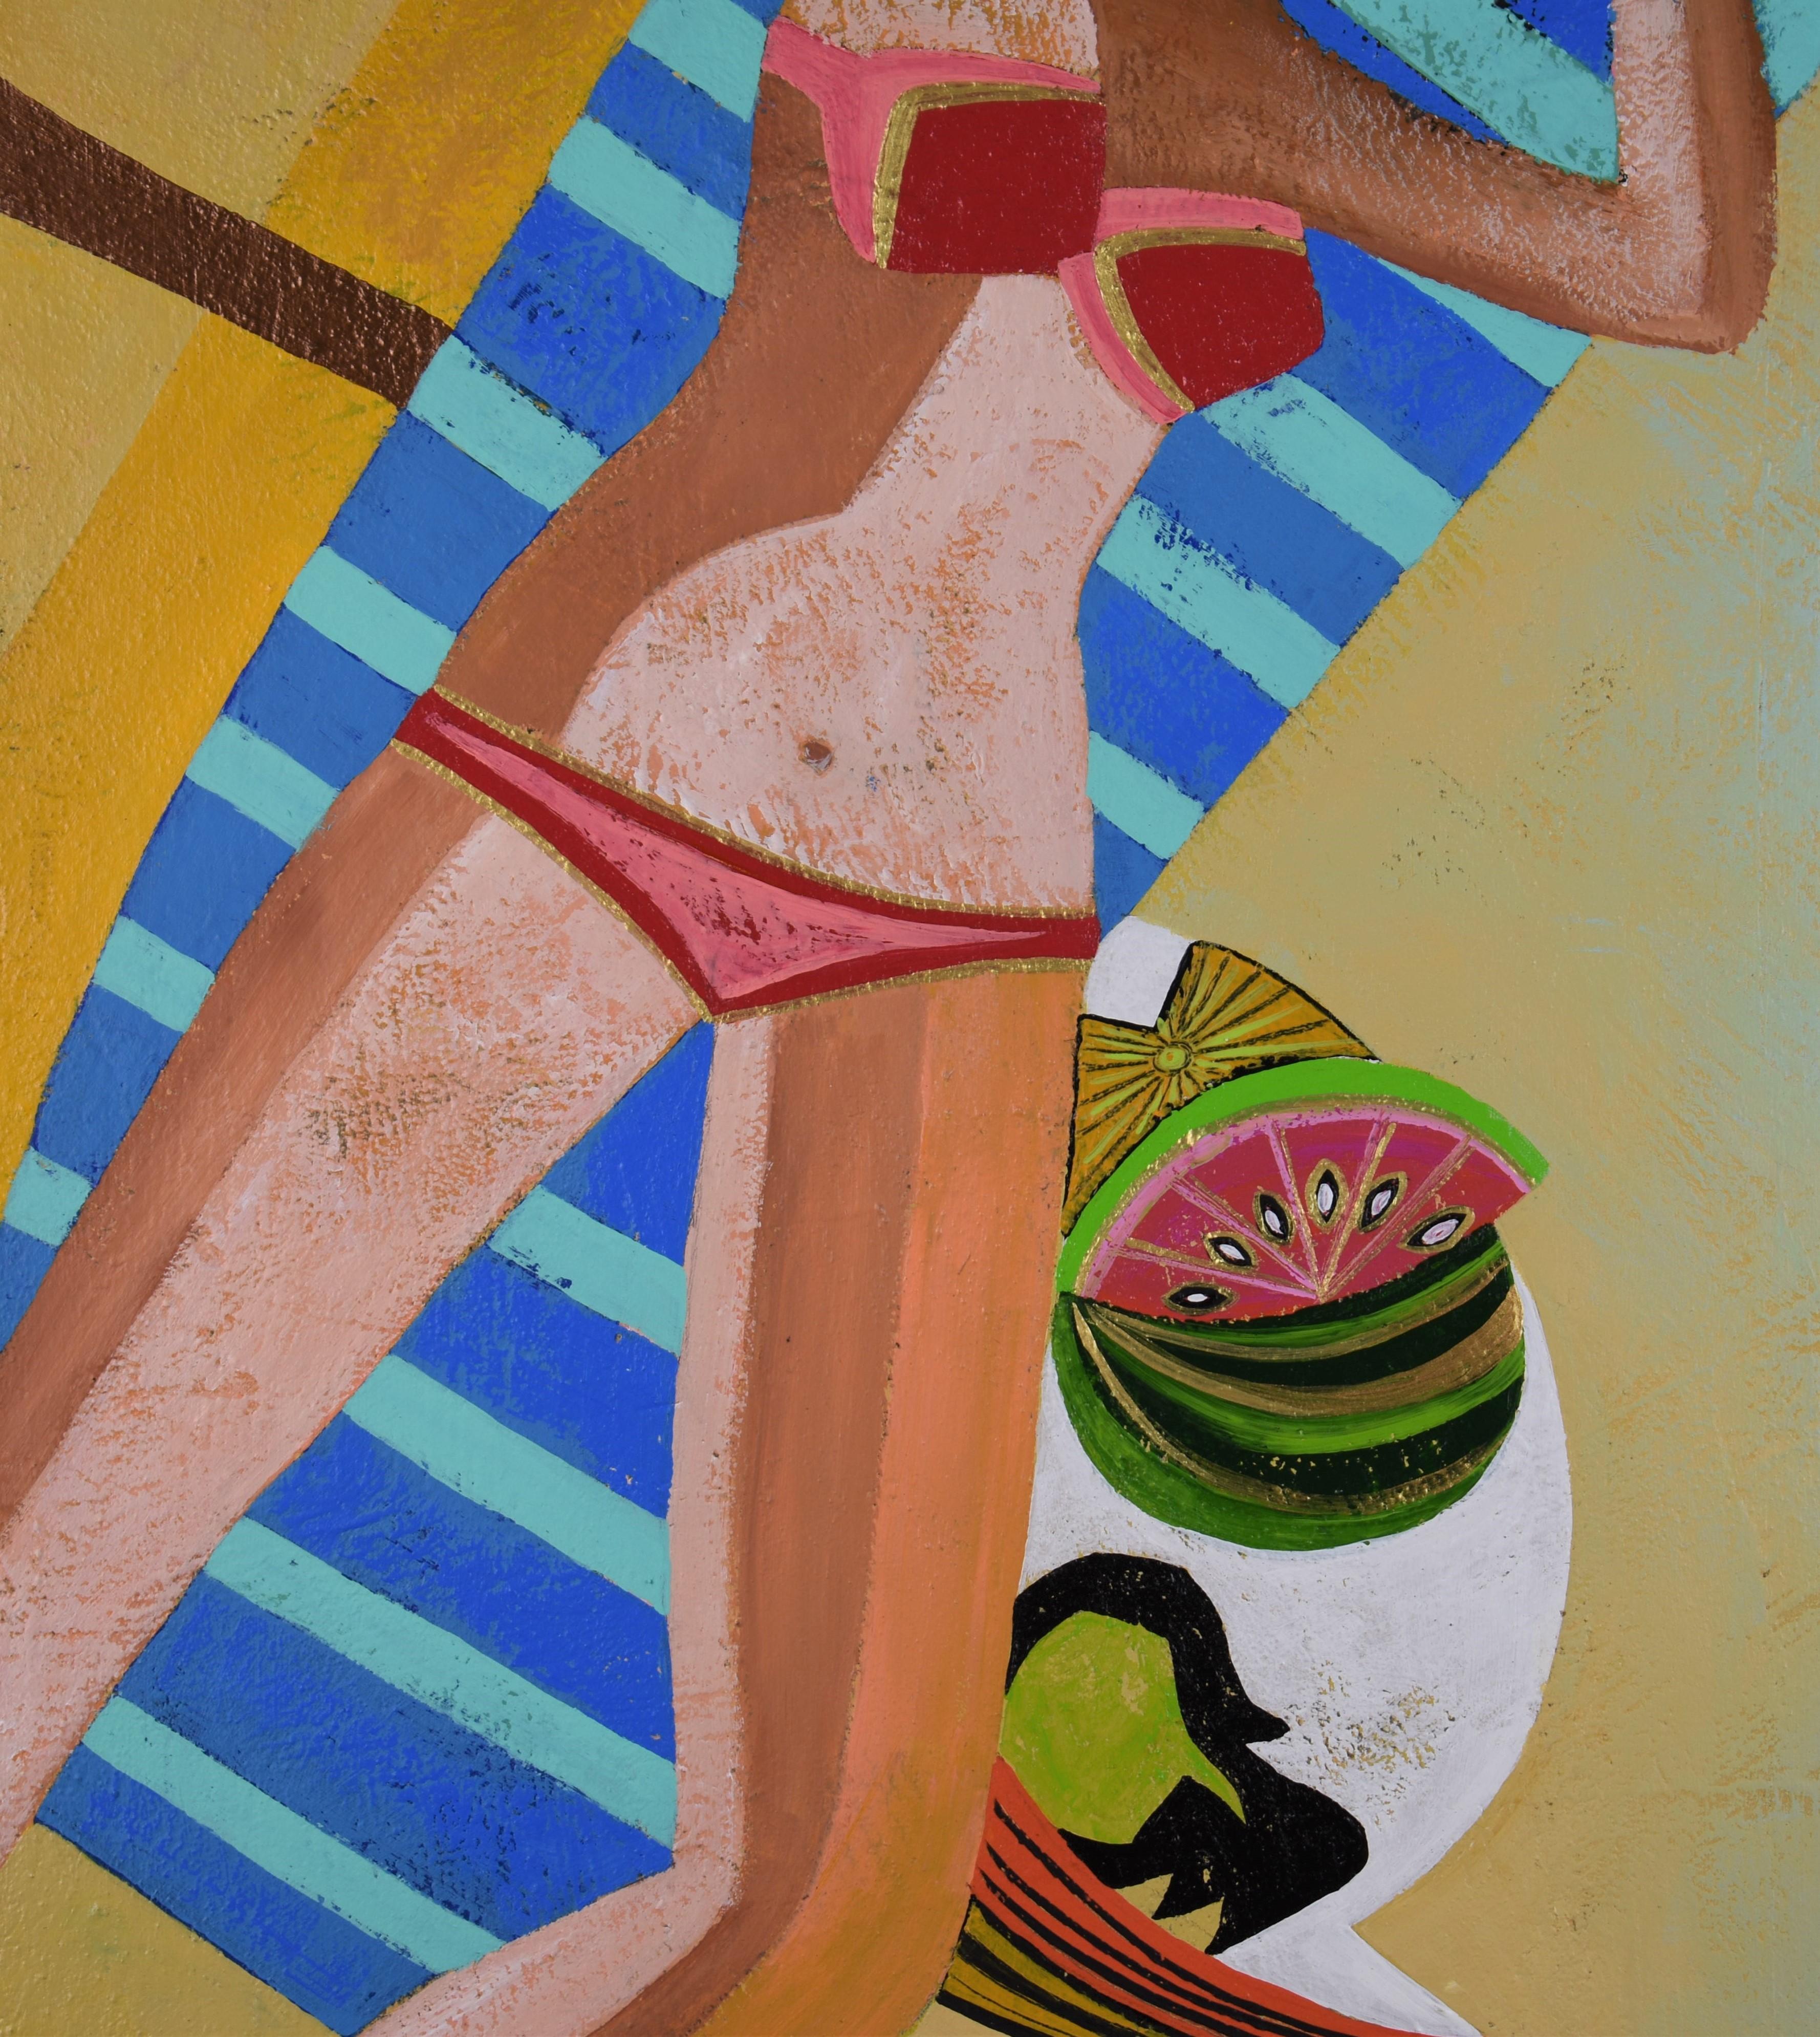 Vacation, Original Painting - Brown Figurative Painting by Diana Rosa